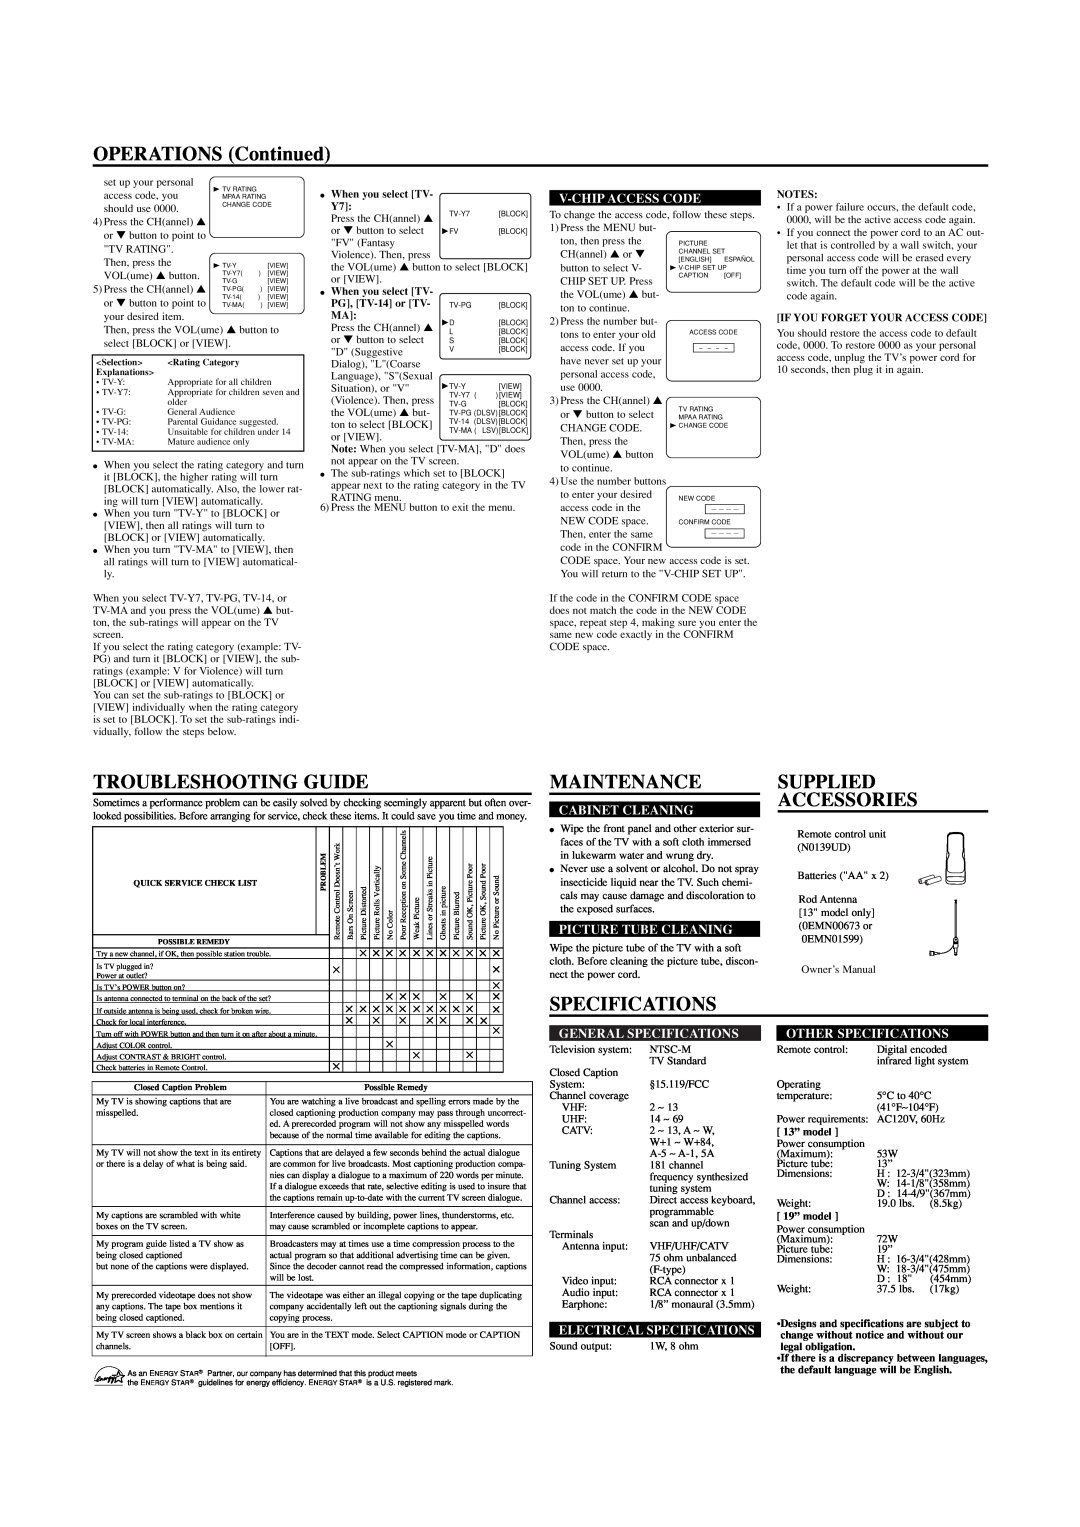 Sylvania SRT2113A OPERATIONS Continued, Troubleshooting Guide, Maintenance, Supplied Accessories, Specifications 